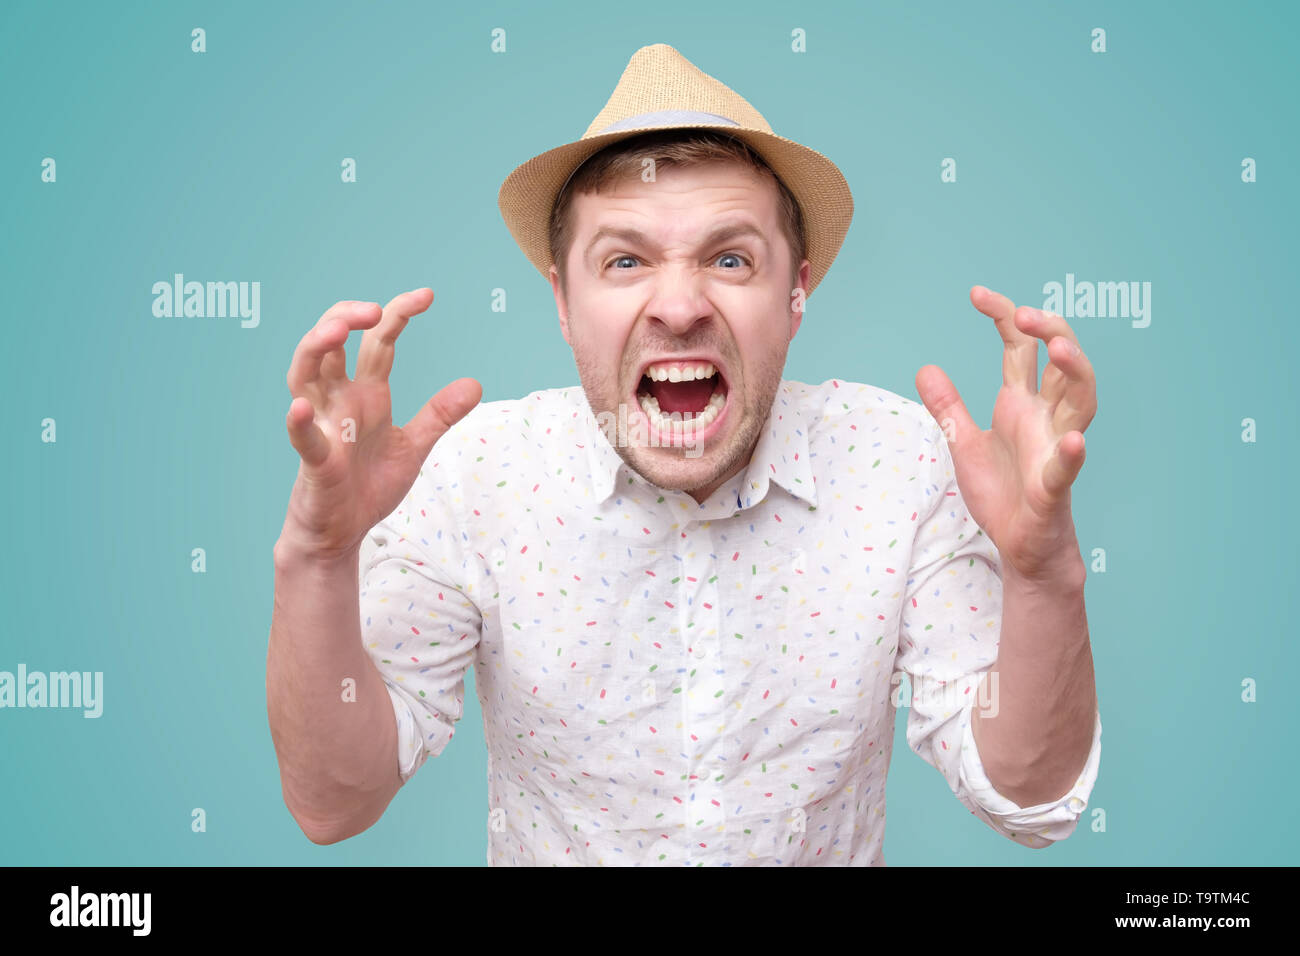 Furious,enraged man with mouth opened in shout Stock Photo